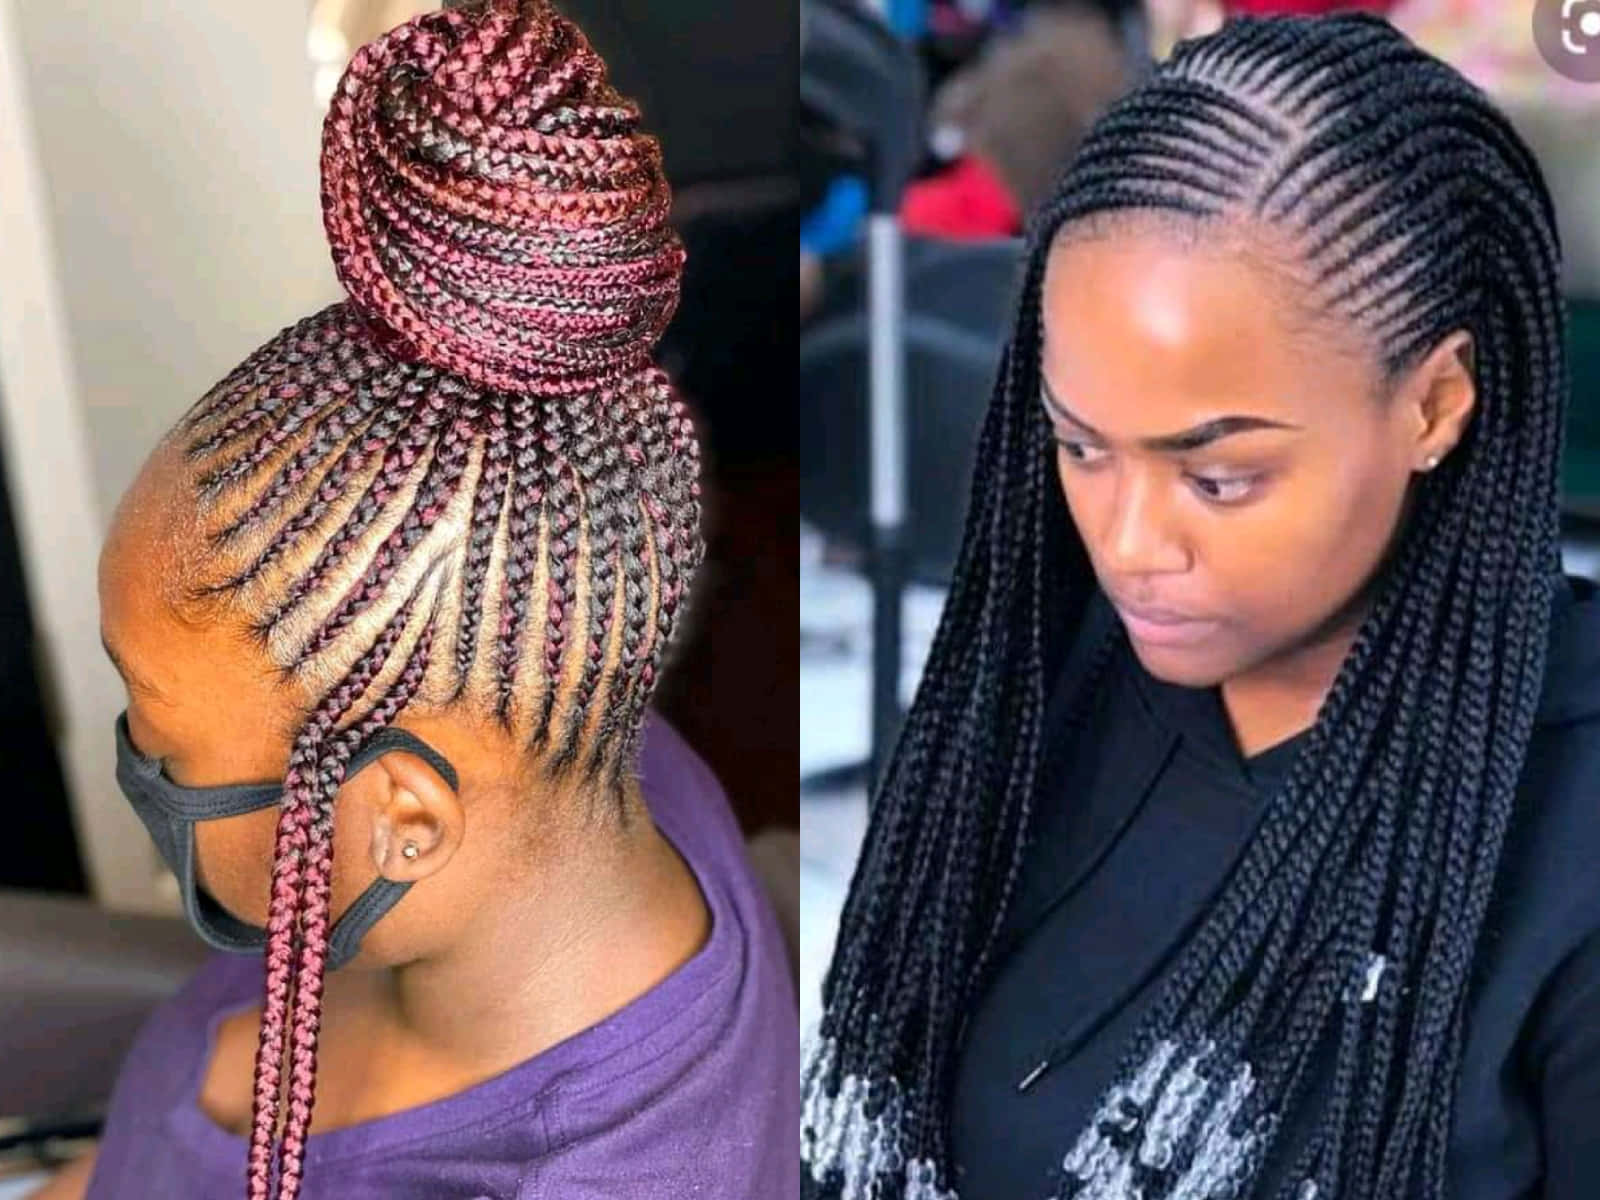 A Woman With Braids And A Woman With Braids